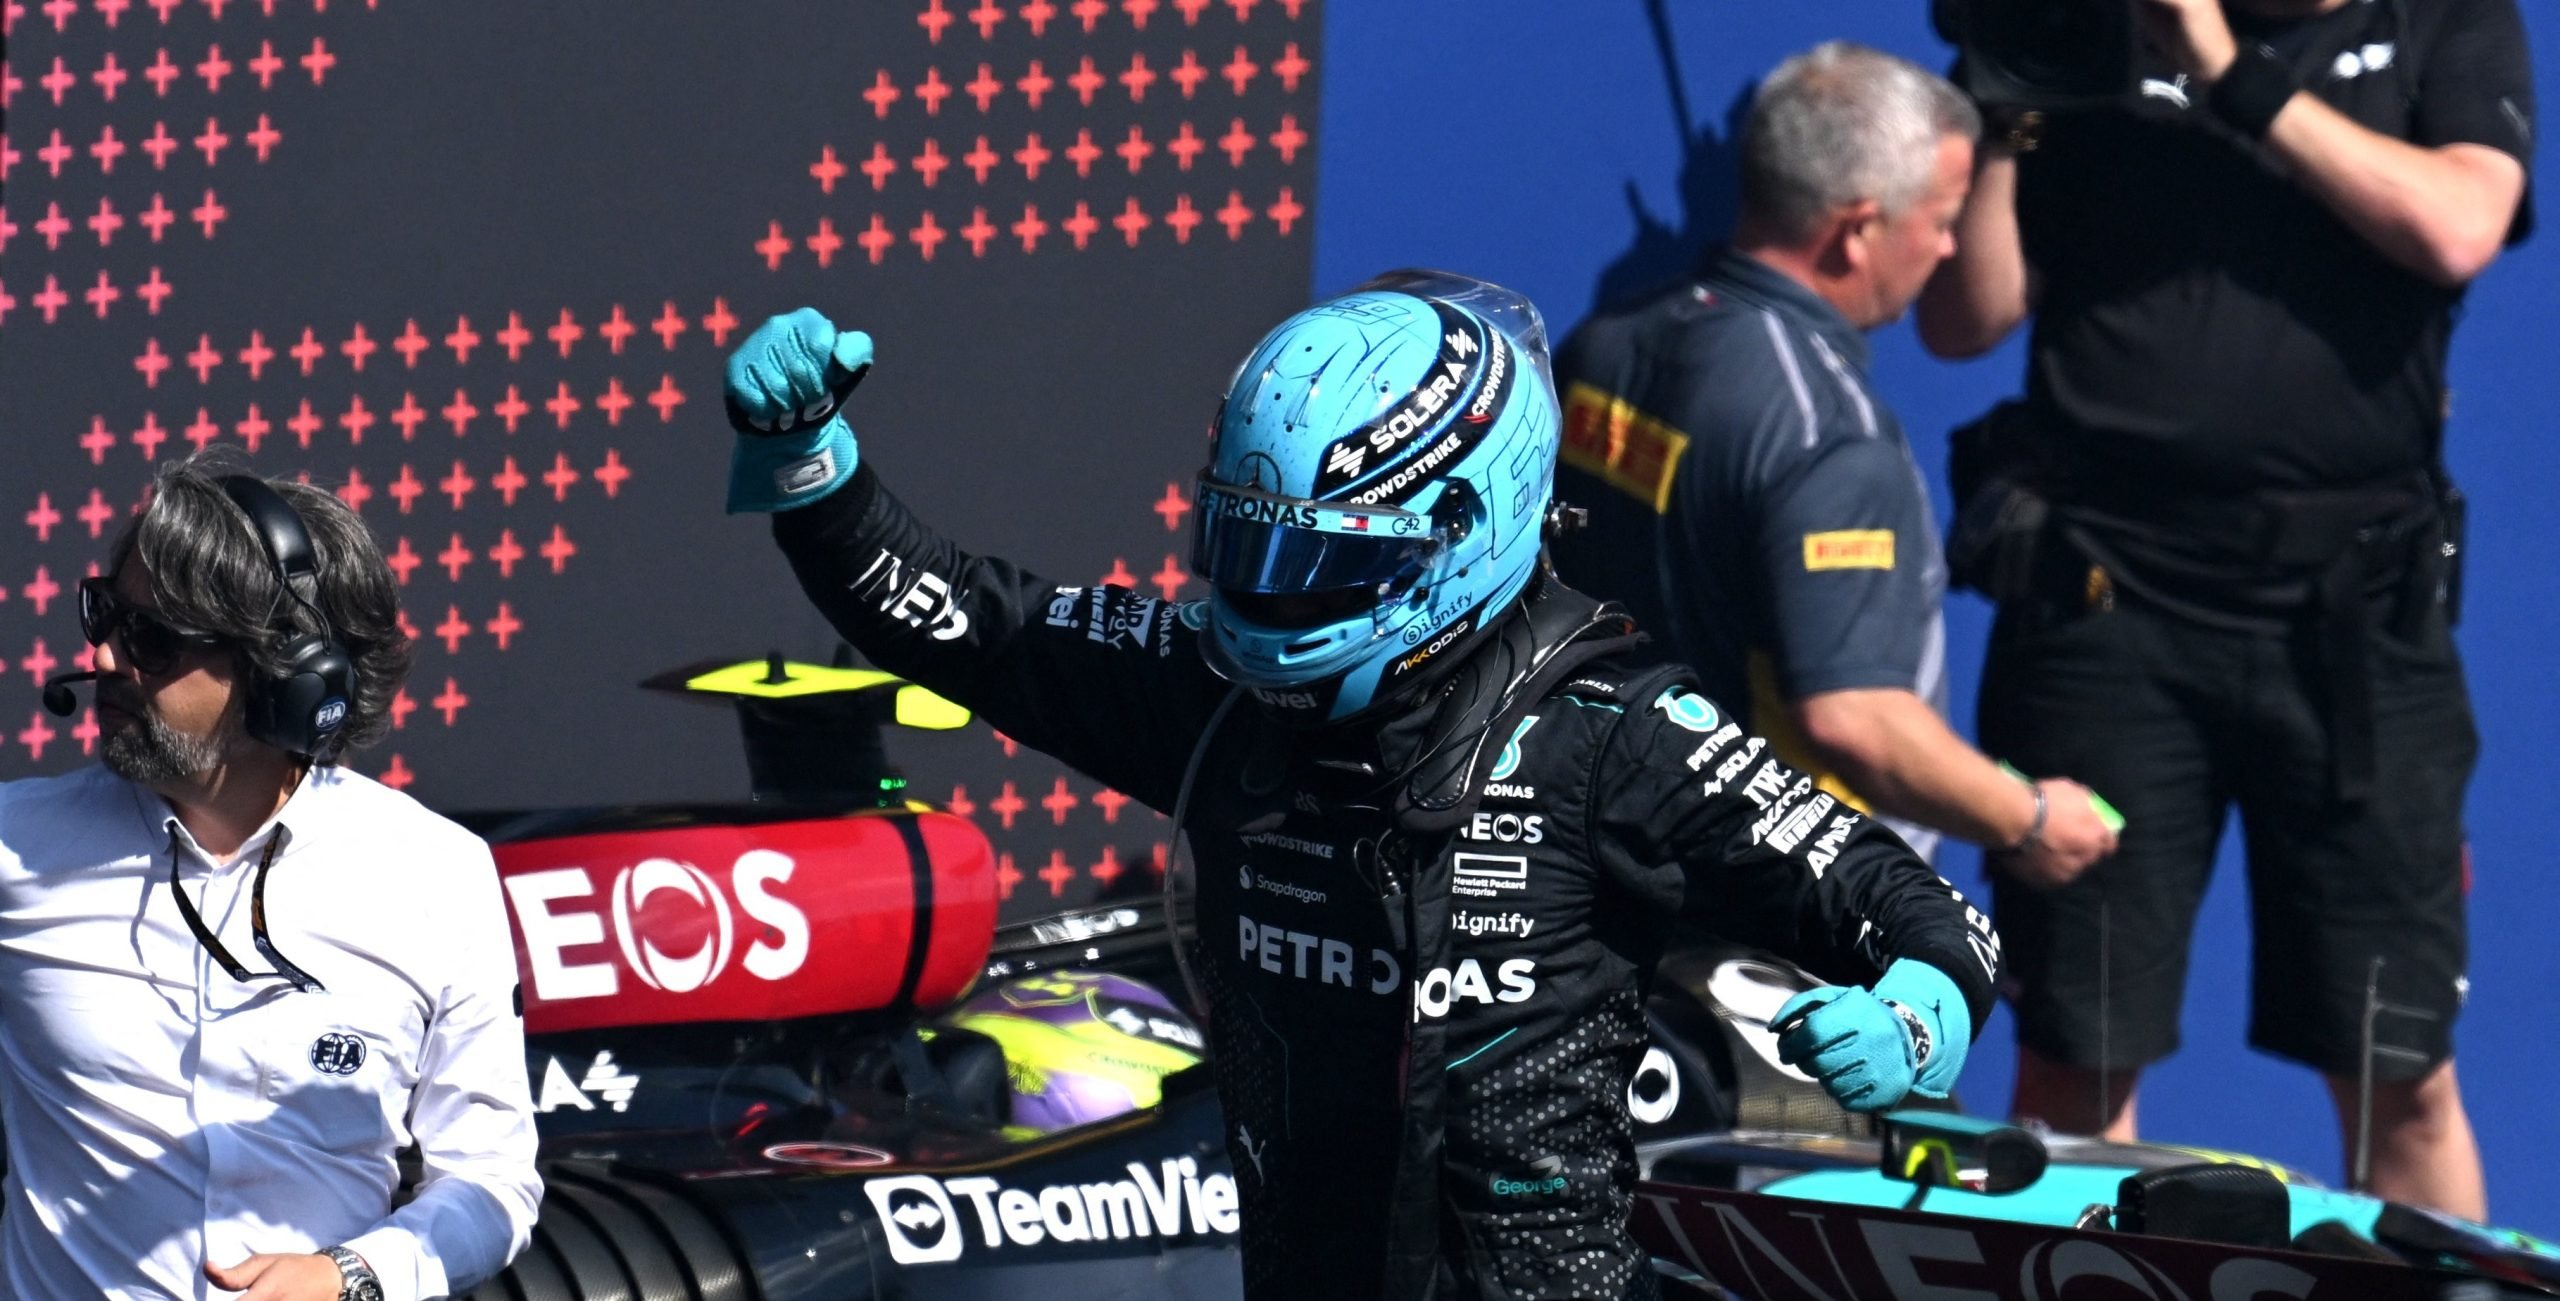 Russell triumphs at the Belgium GP, Mercedes with 1-2 at Spa 4